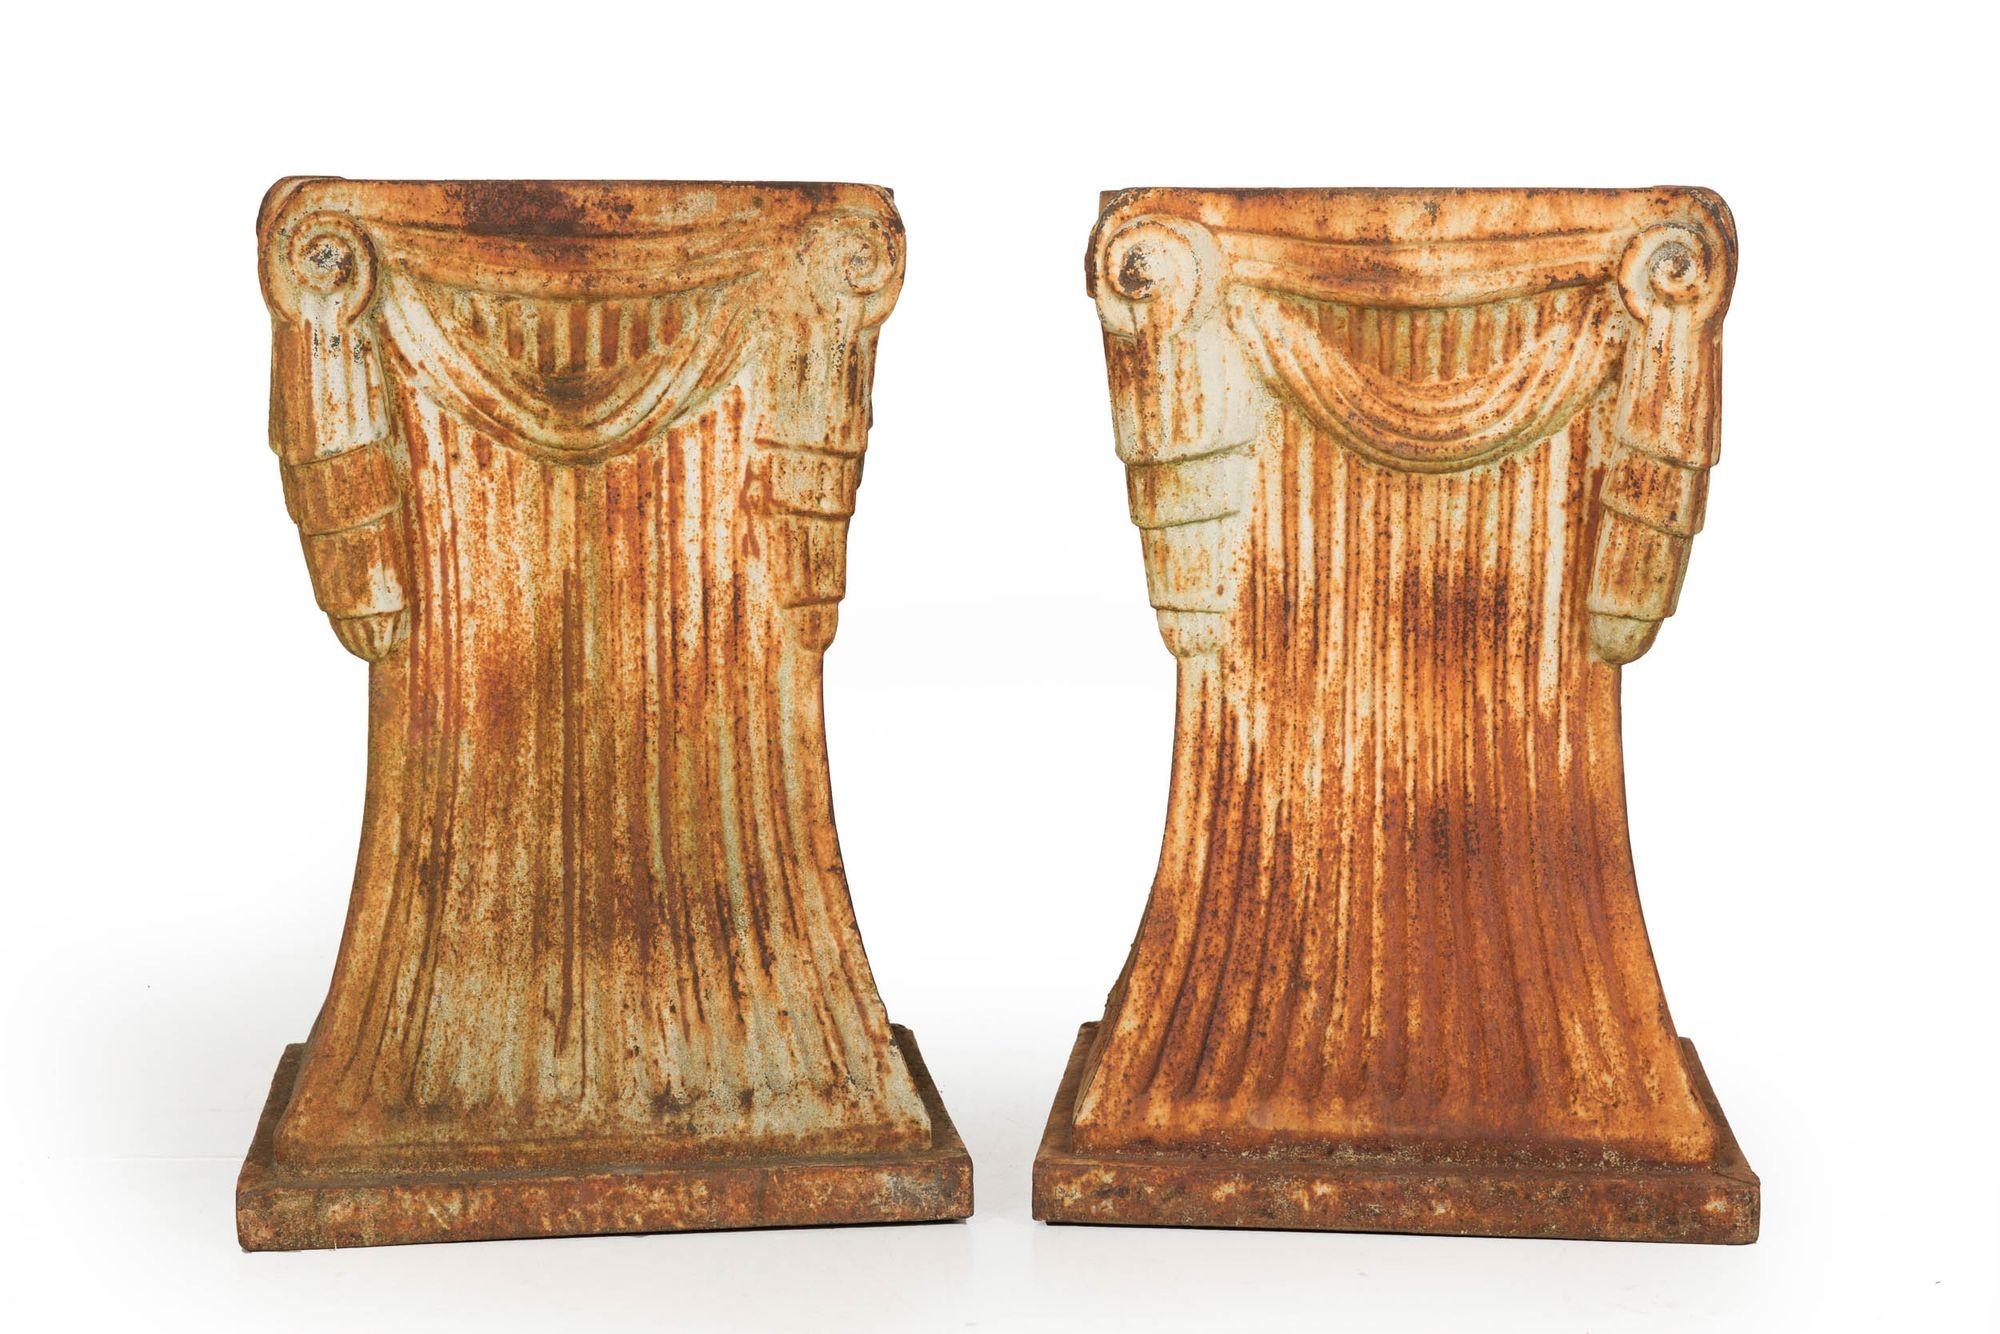 Unusual Pair of Art Deco Cast-Iron Garden Pedestals for Statuary or Planters In Good Condition For Sale In Shippensburg, PA